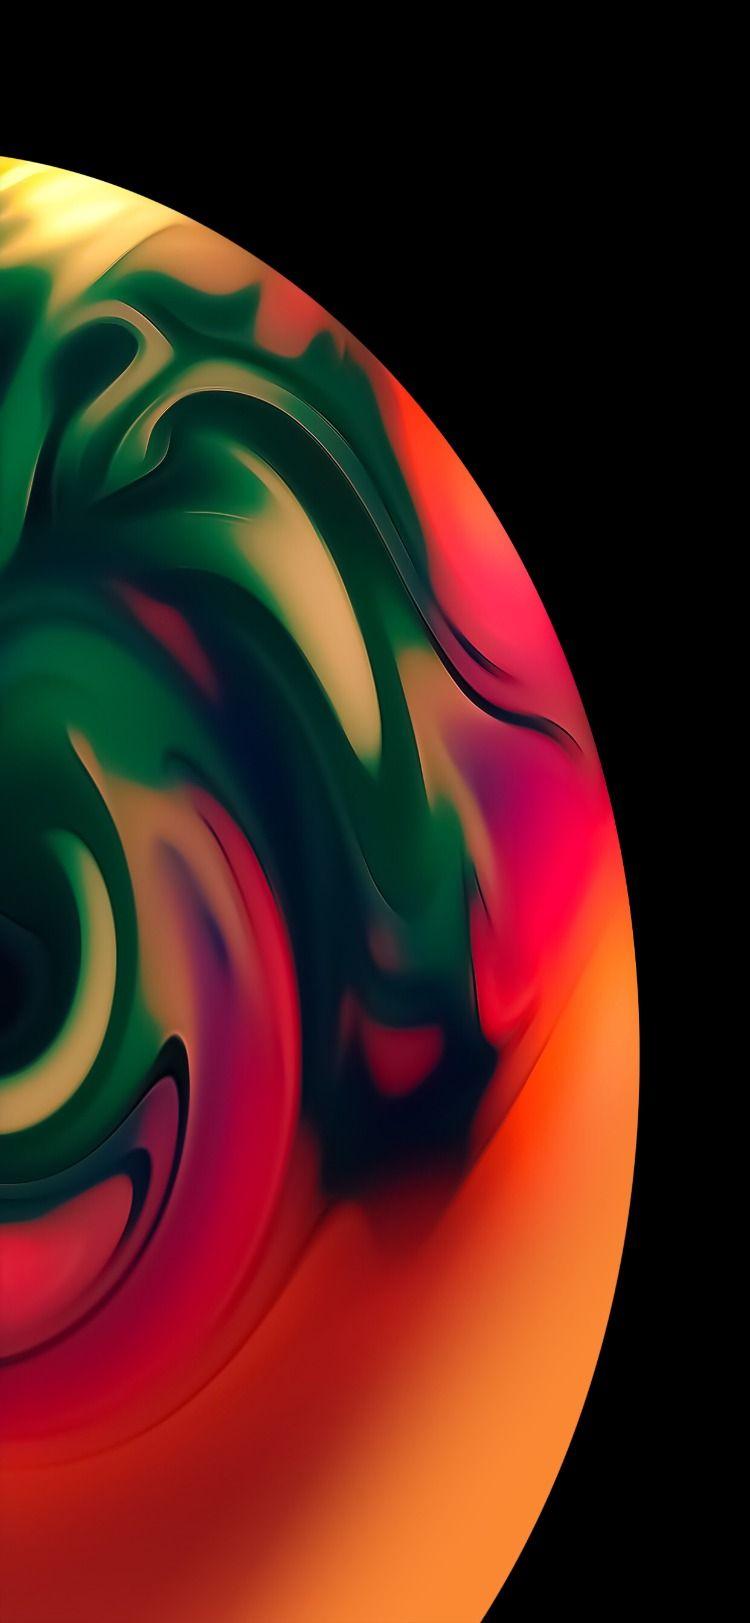 Abstract Wallpaper Download for iPhone & Android, colorful